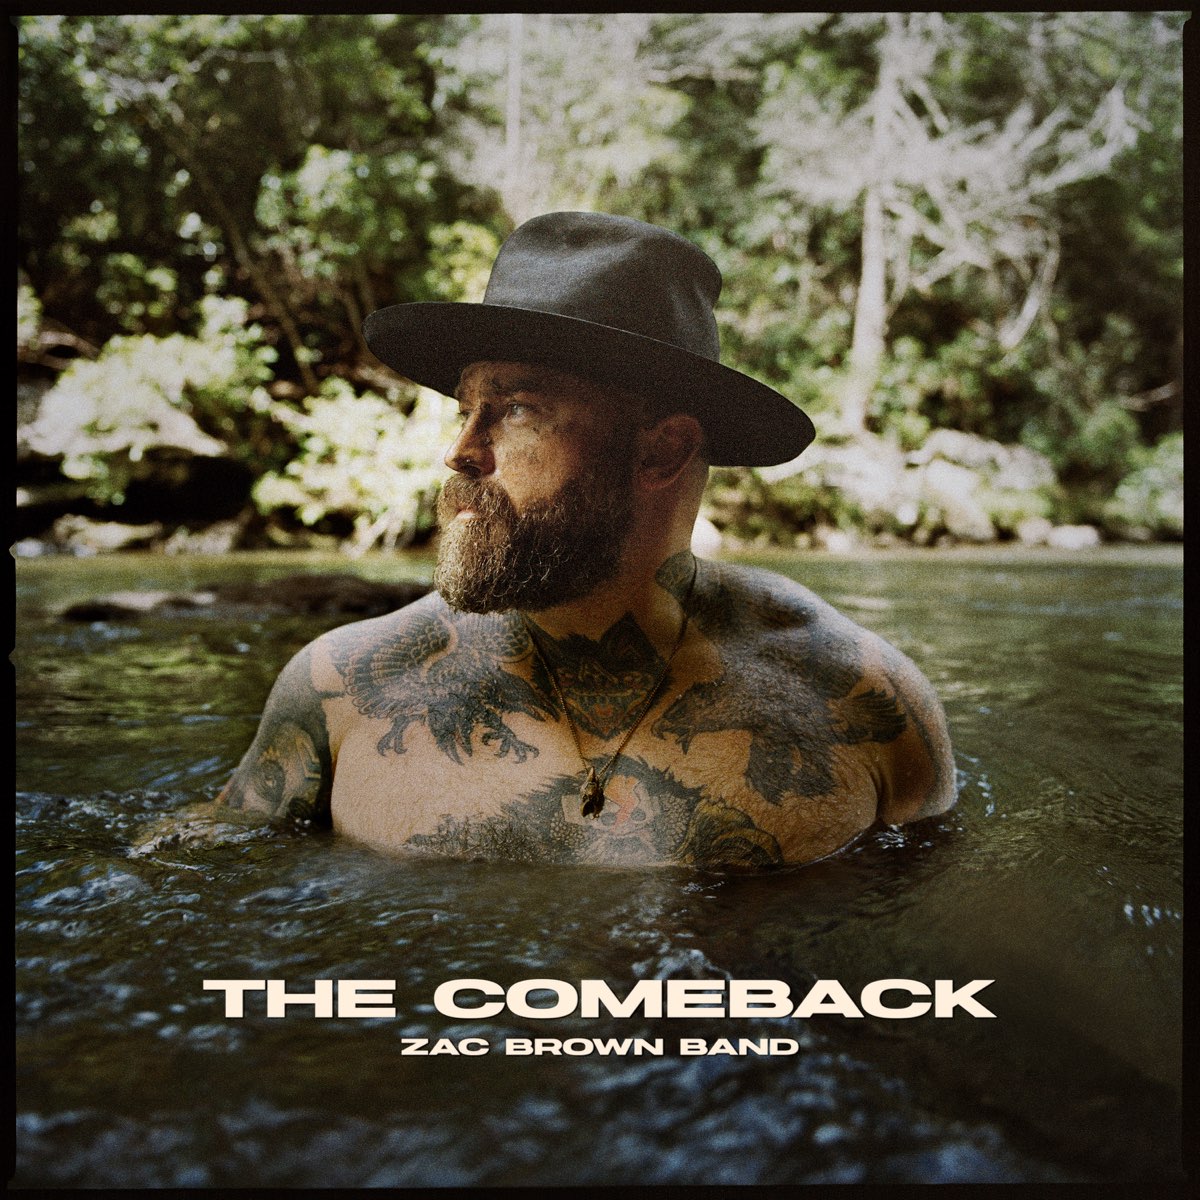 ‎The Comeback by Zac Brown Band on Apple Music